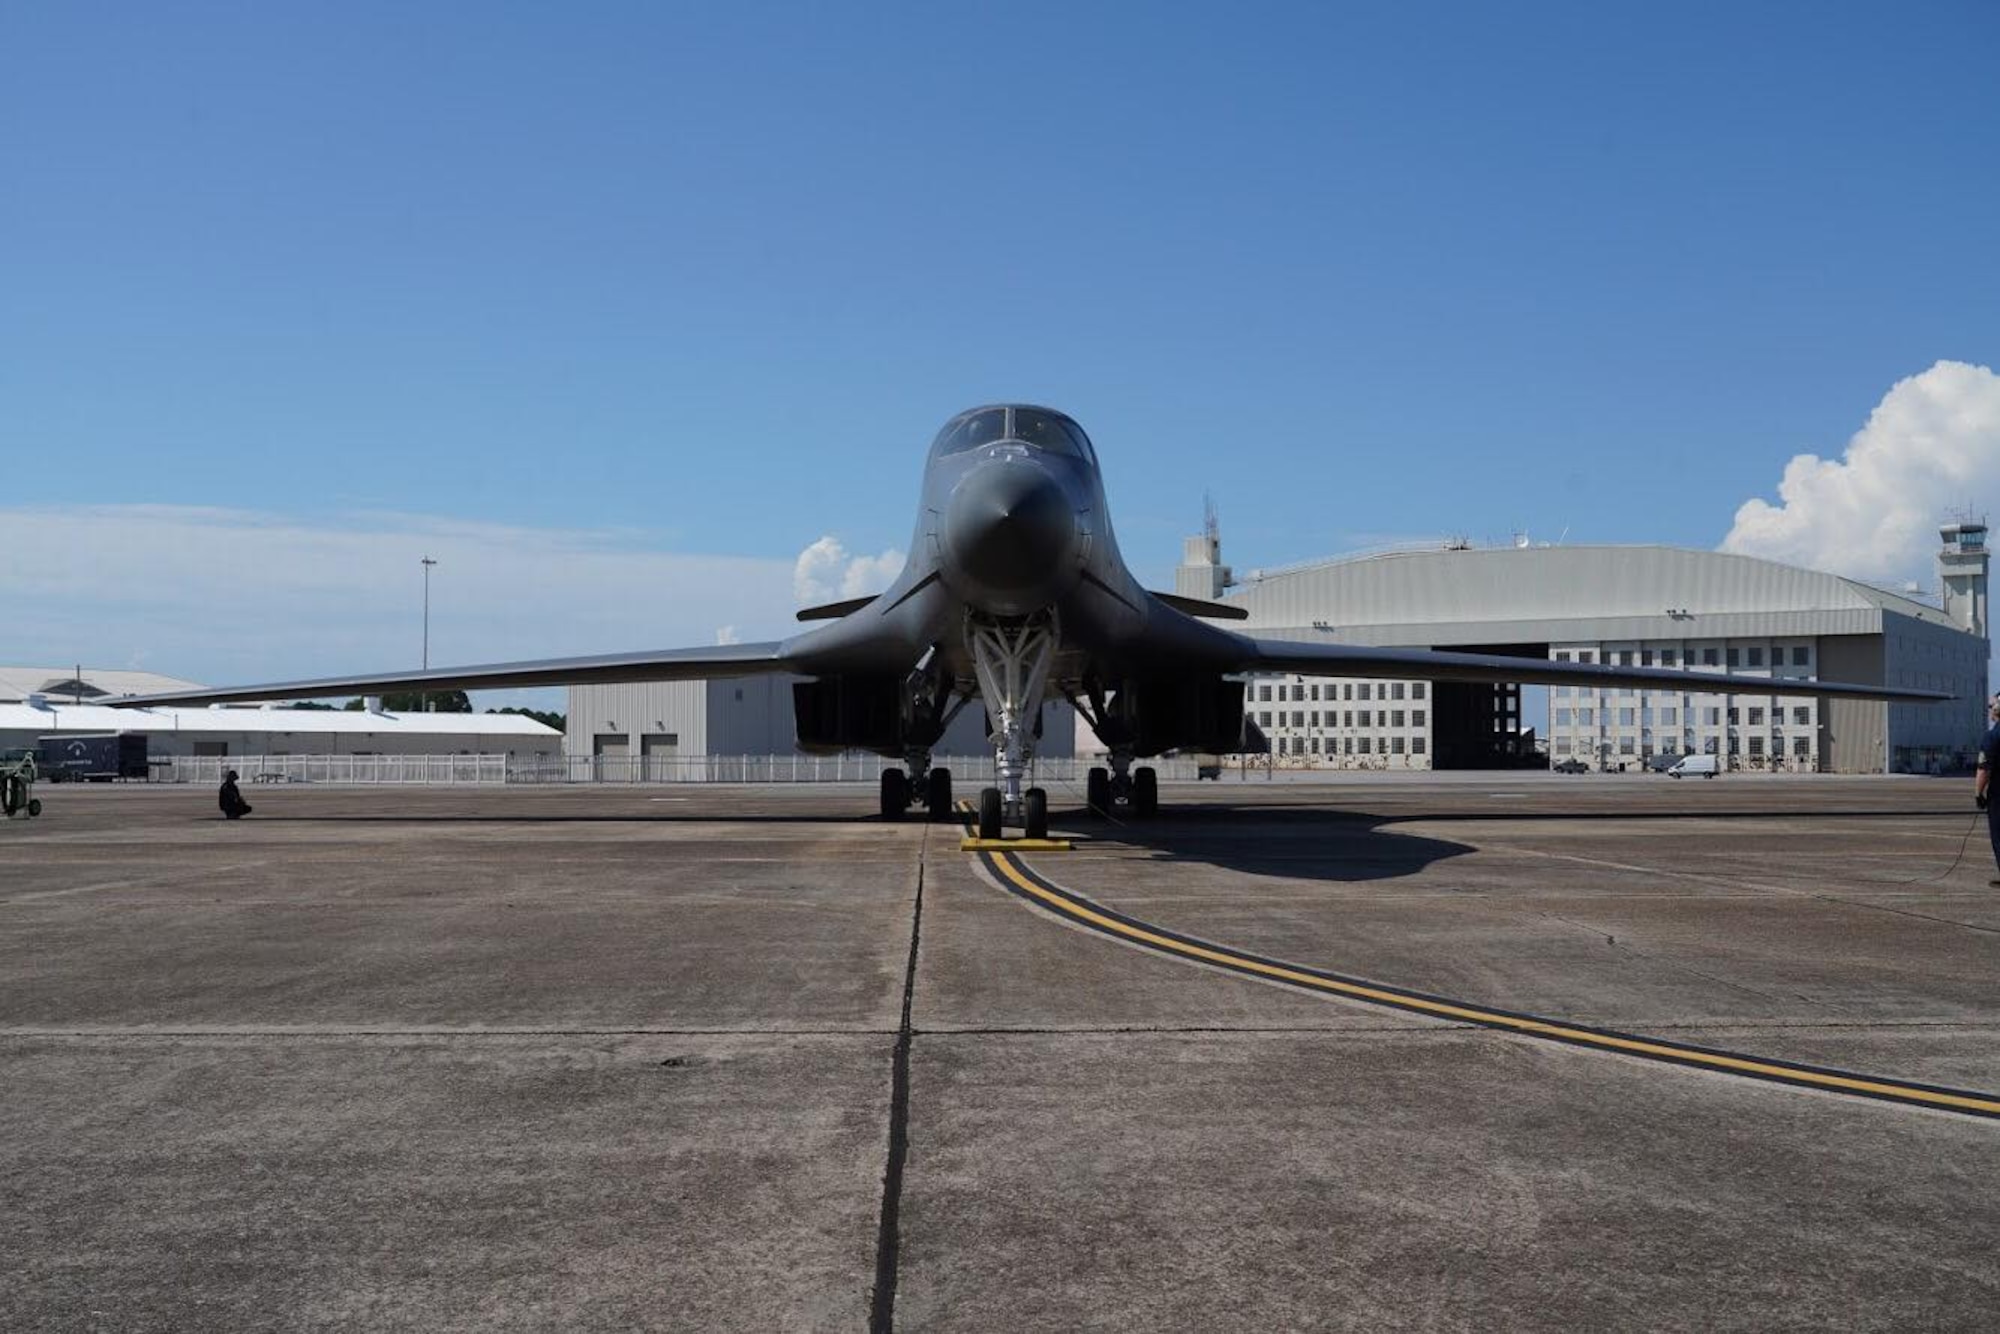 A B1-B Lancer from the 337th Test and Evaluation Squadron at Dyess Air Force Base, Texas sits on the ramp at Eglin Air Force Base, Fla. on July 30, 2016. Aircrew brought the 53rd Wing bombers to allow wing personnel an opportunity to see one of their geographically separated aircraft up close. (U.S. Army photo/SGT Sean Hall)